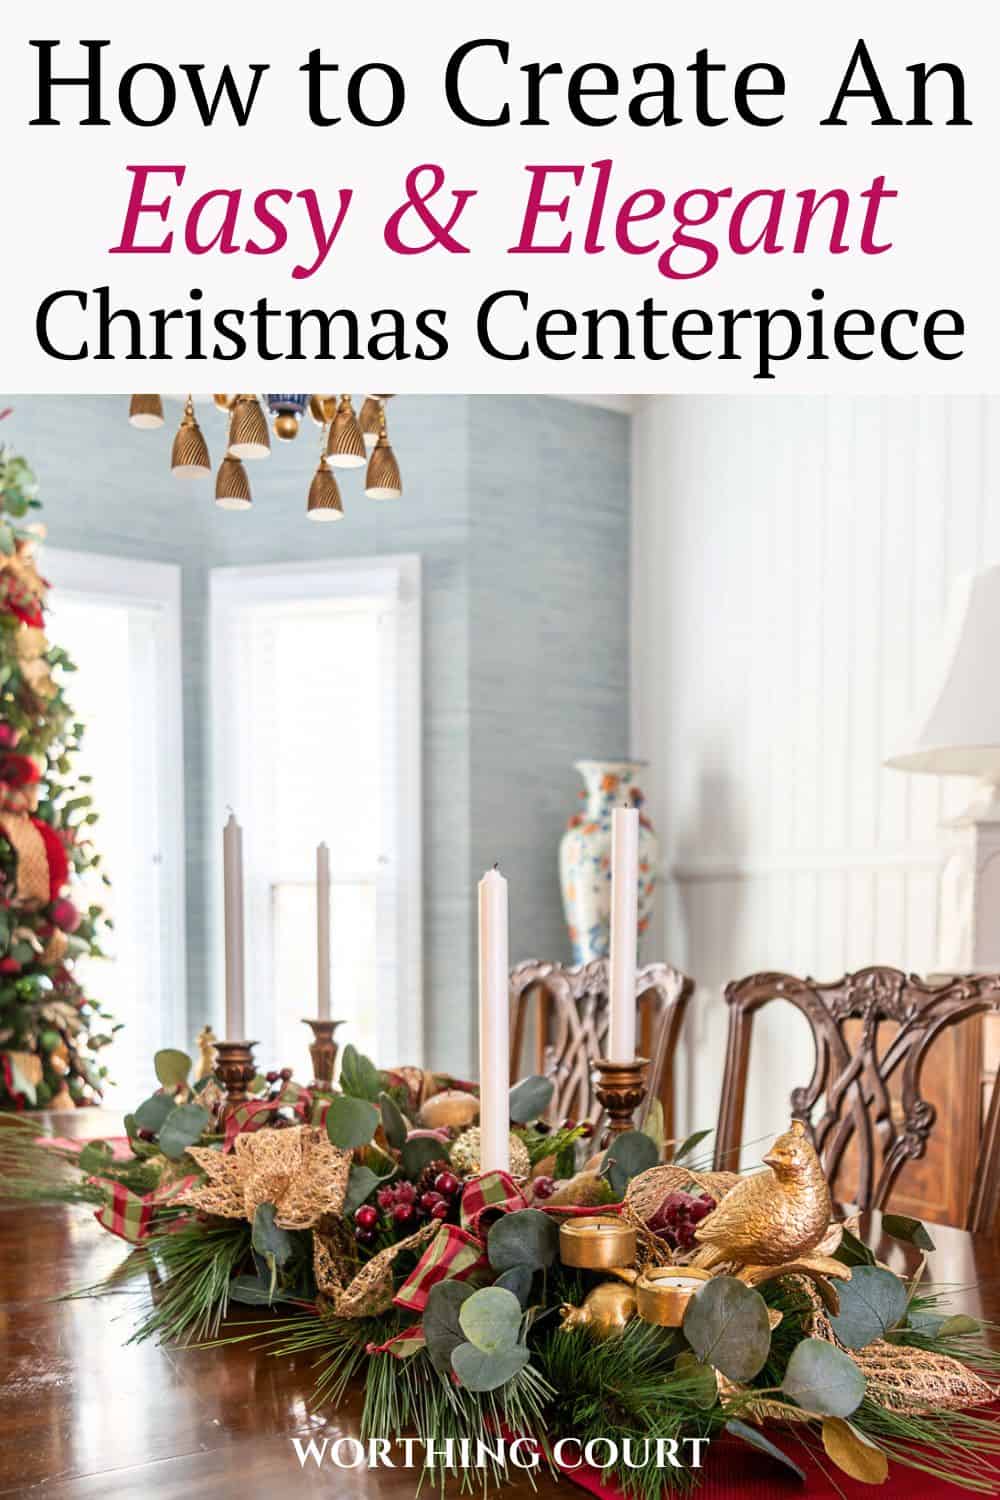 Pinterest graphic for how to create an easy elegant Christmas centerpiece